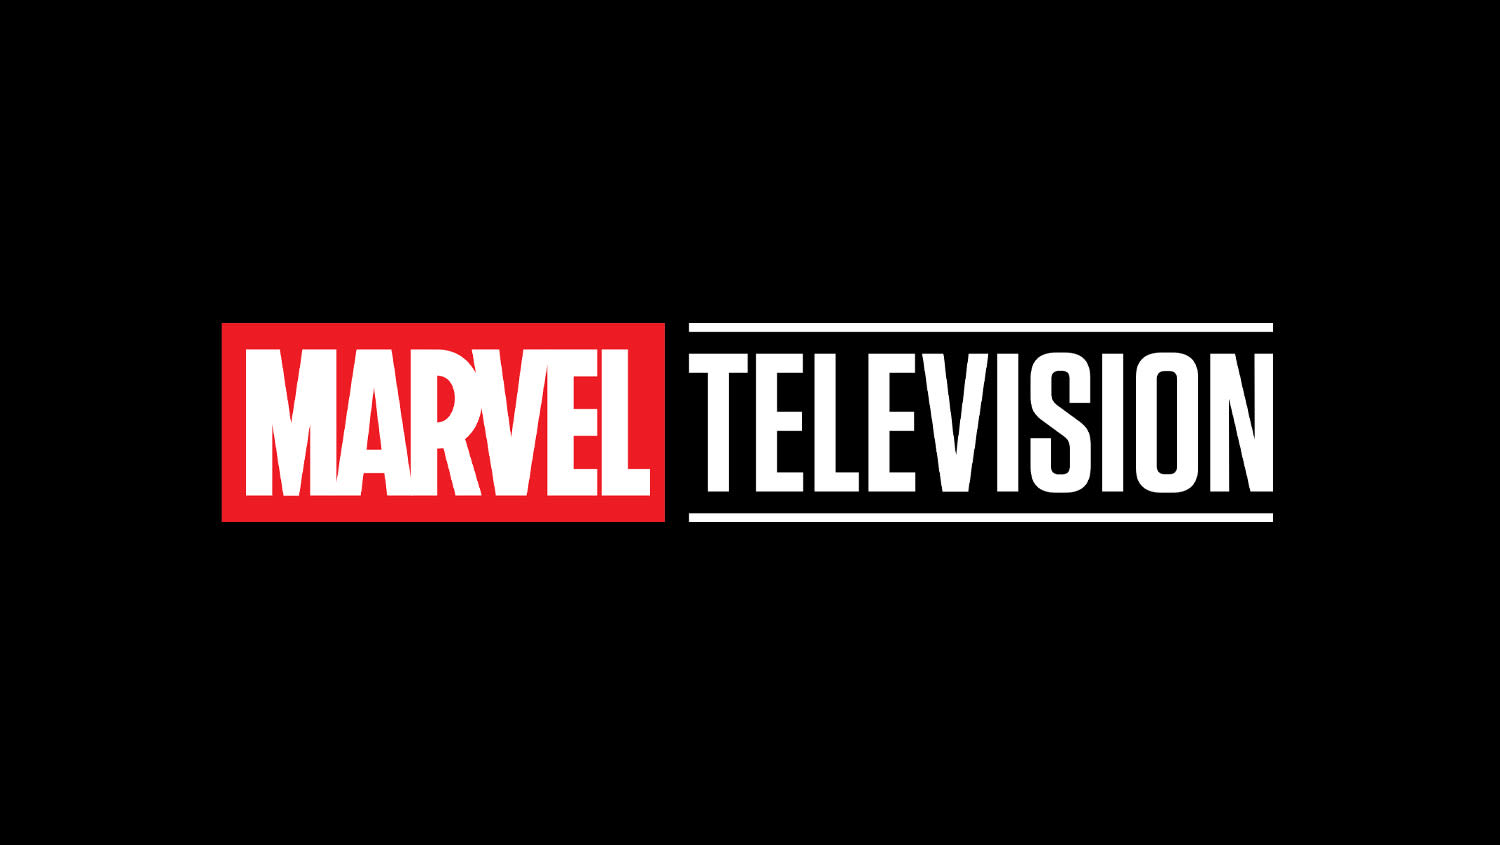 Marvel Television Banner Returns & Aims To Help Viewers “Jump In Anywhere”